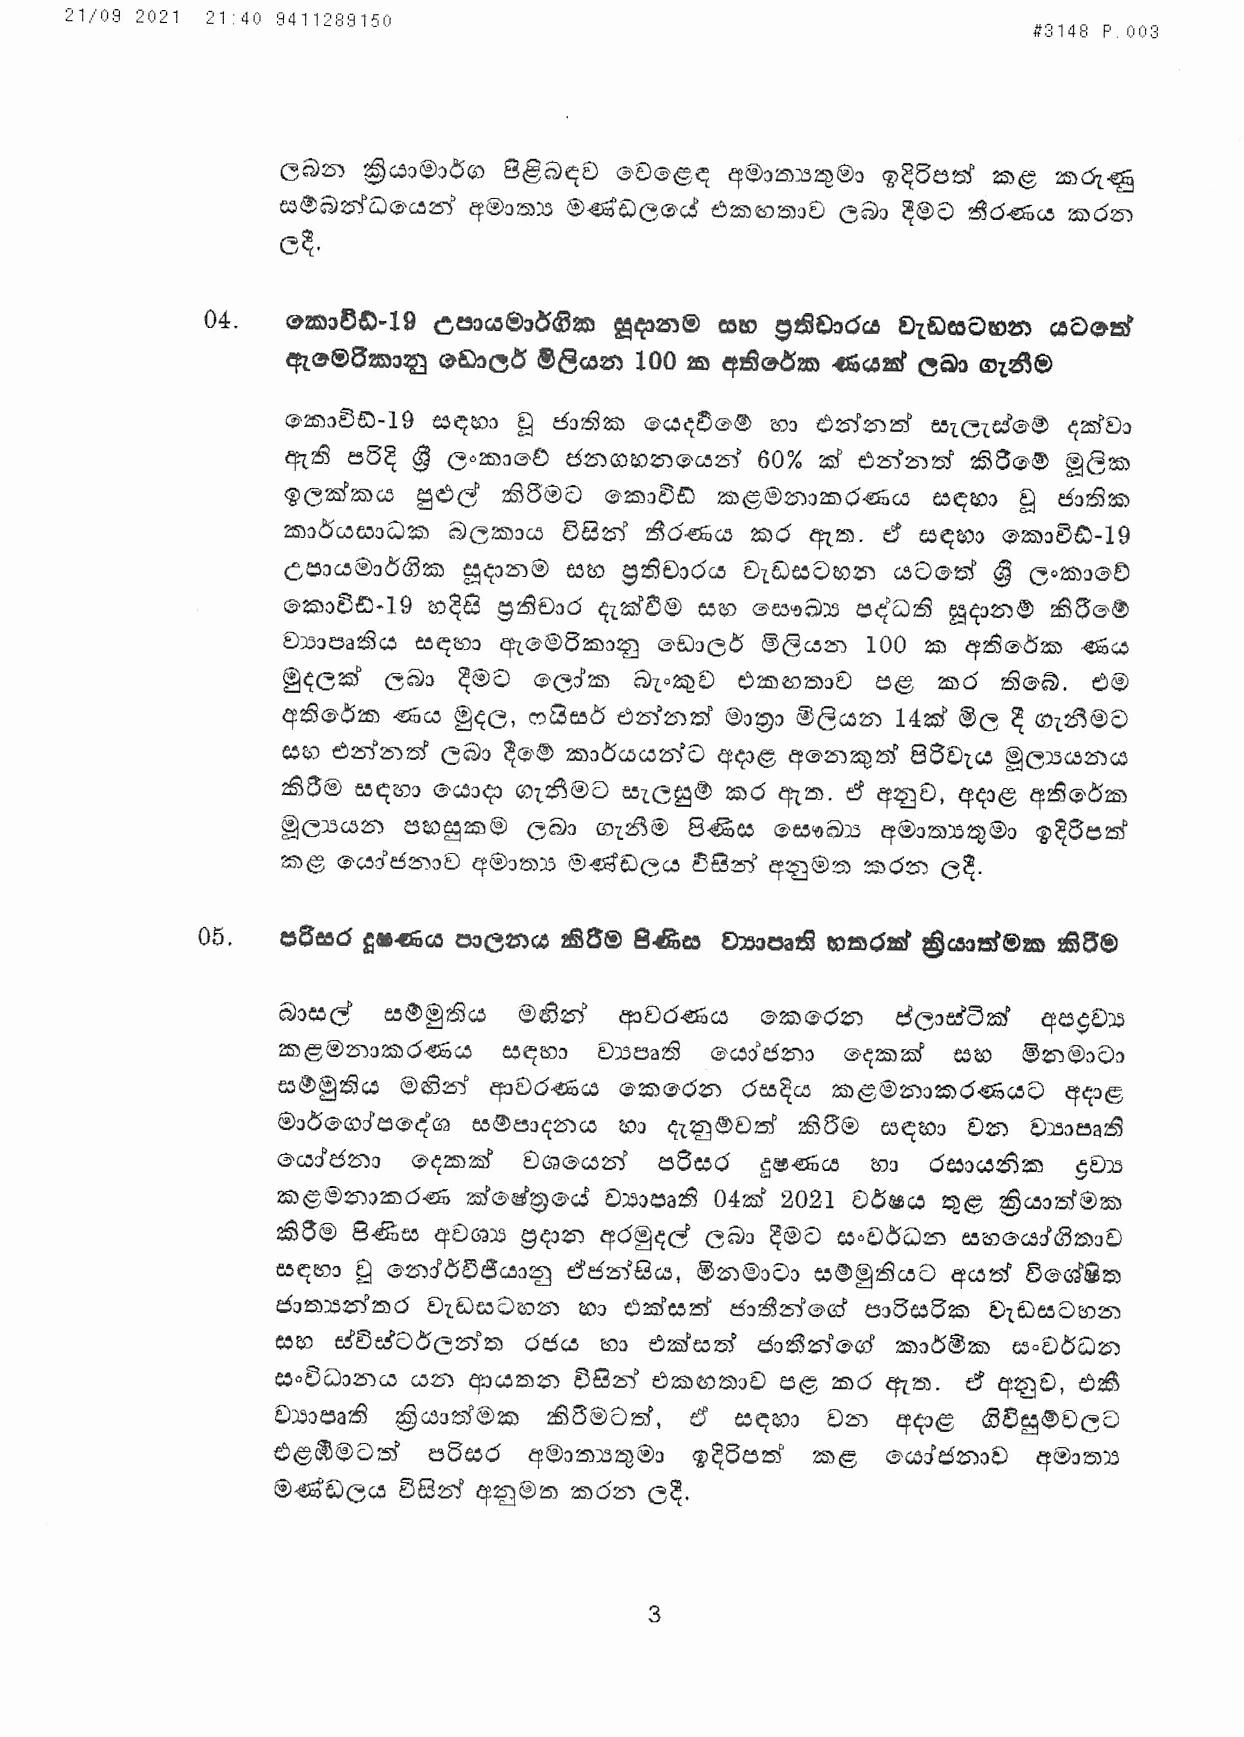 Cabinet Decisions on 21.09.2021 page 001